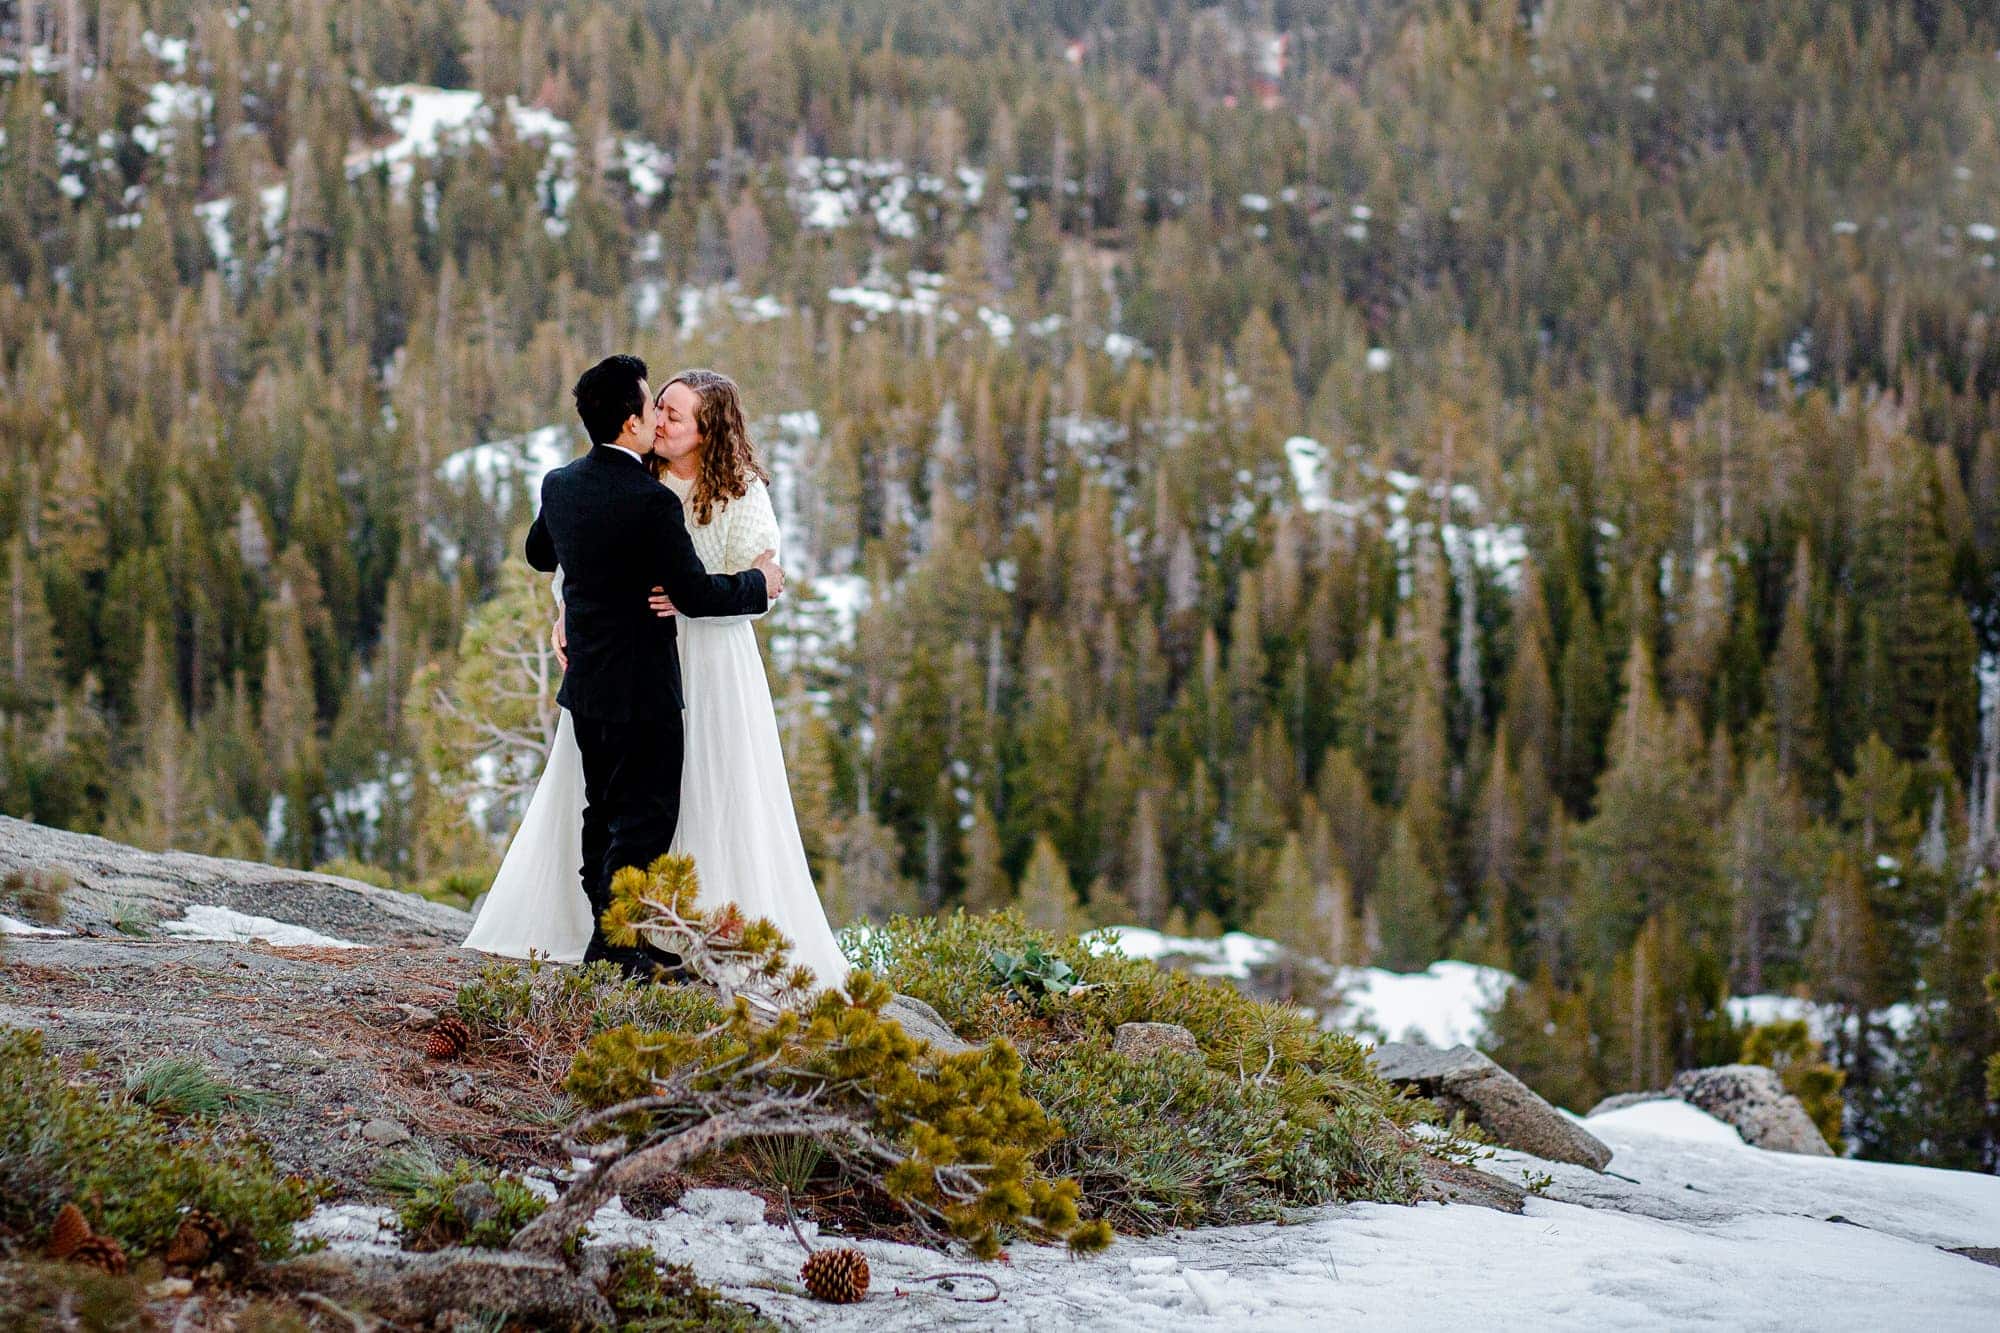 Bride and groom kissing in a snow covered forest